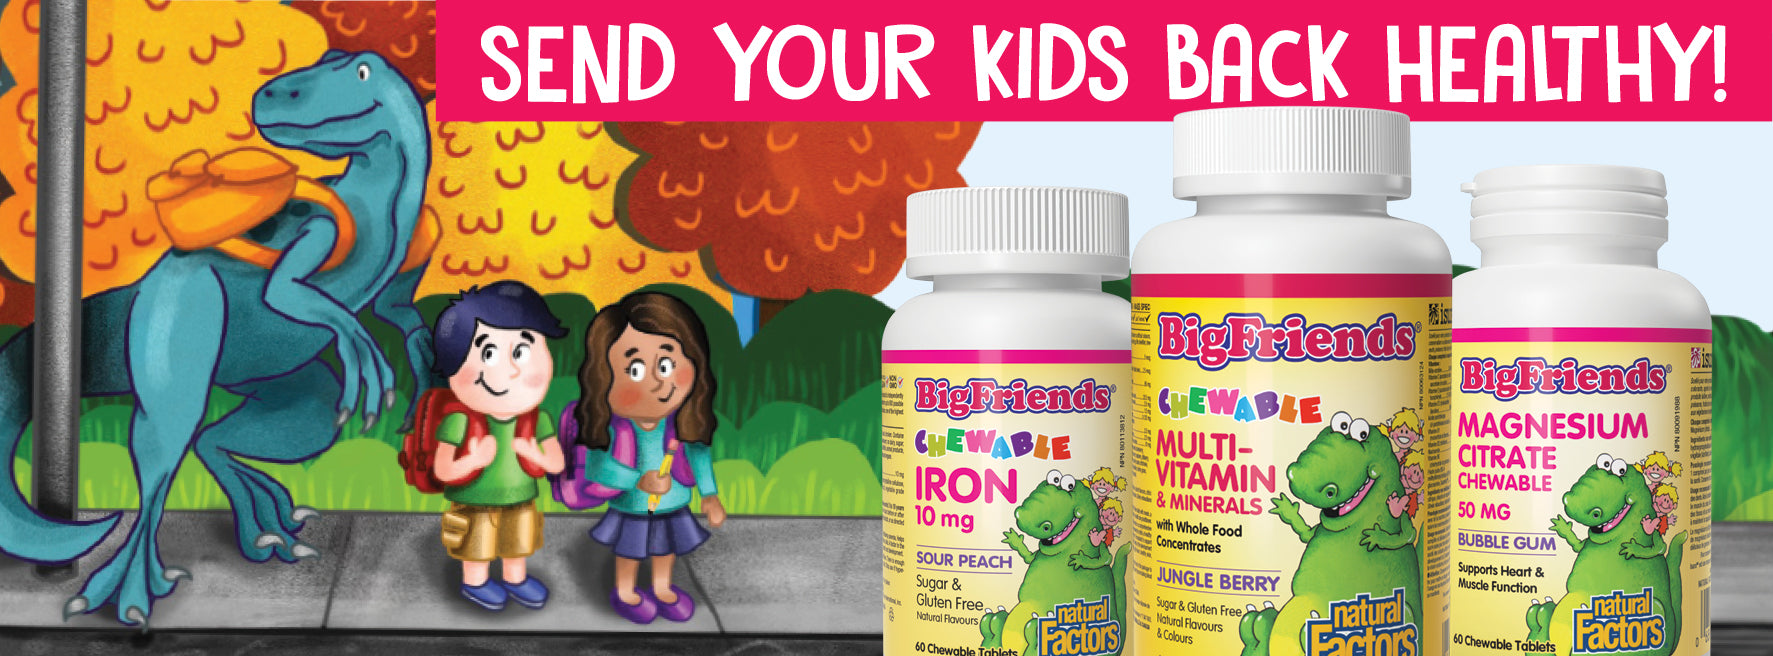 PM-HEALTHY KIDS WITH BIG FRIENDS